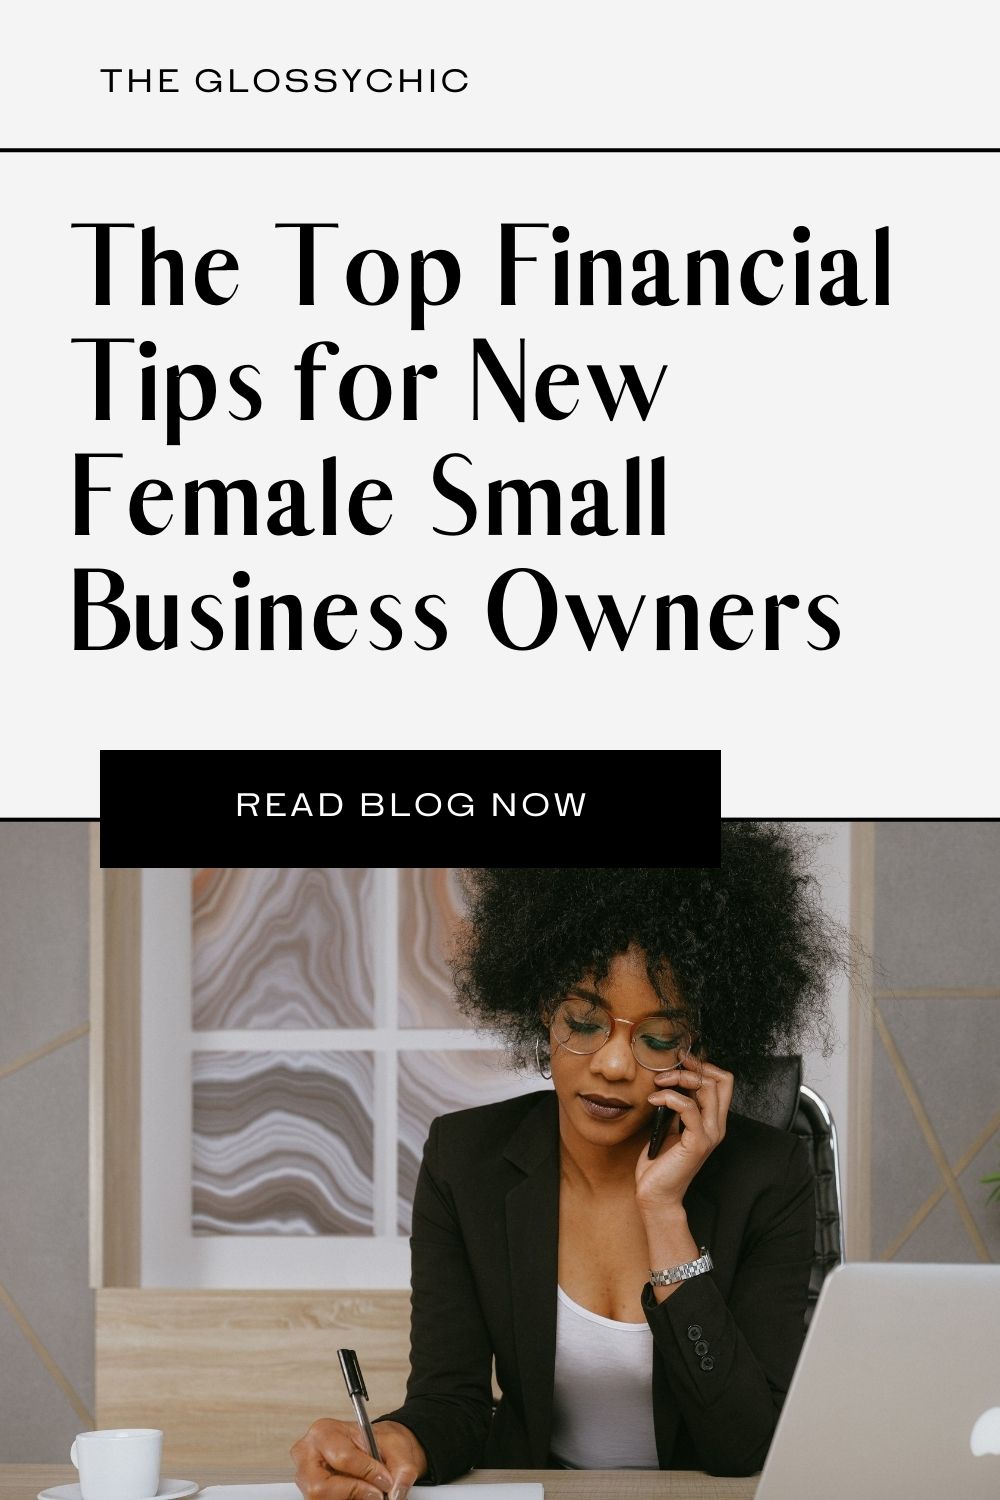 The Top Financial Tips for New Female Small Business Owners